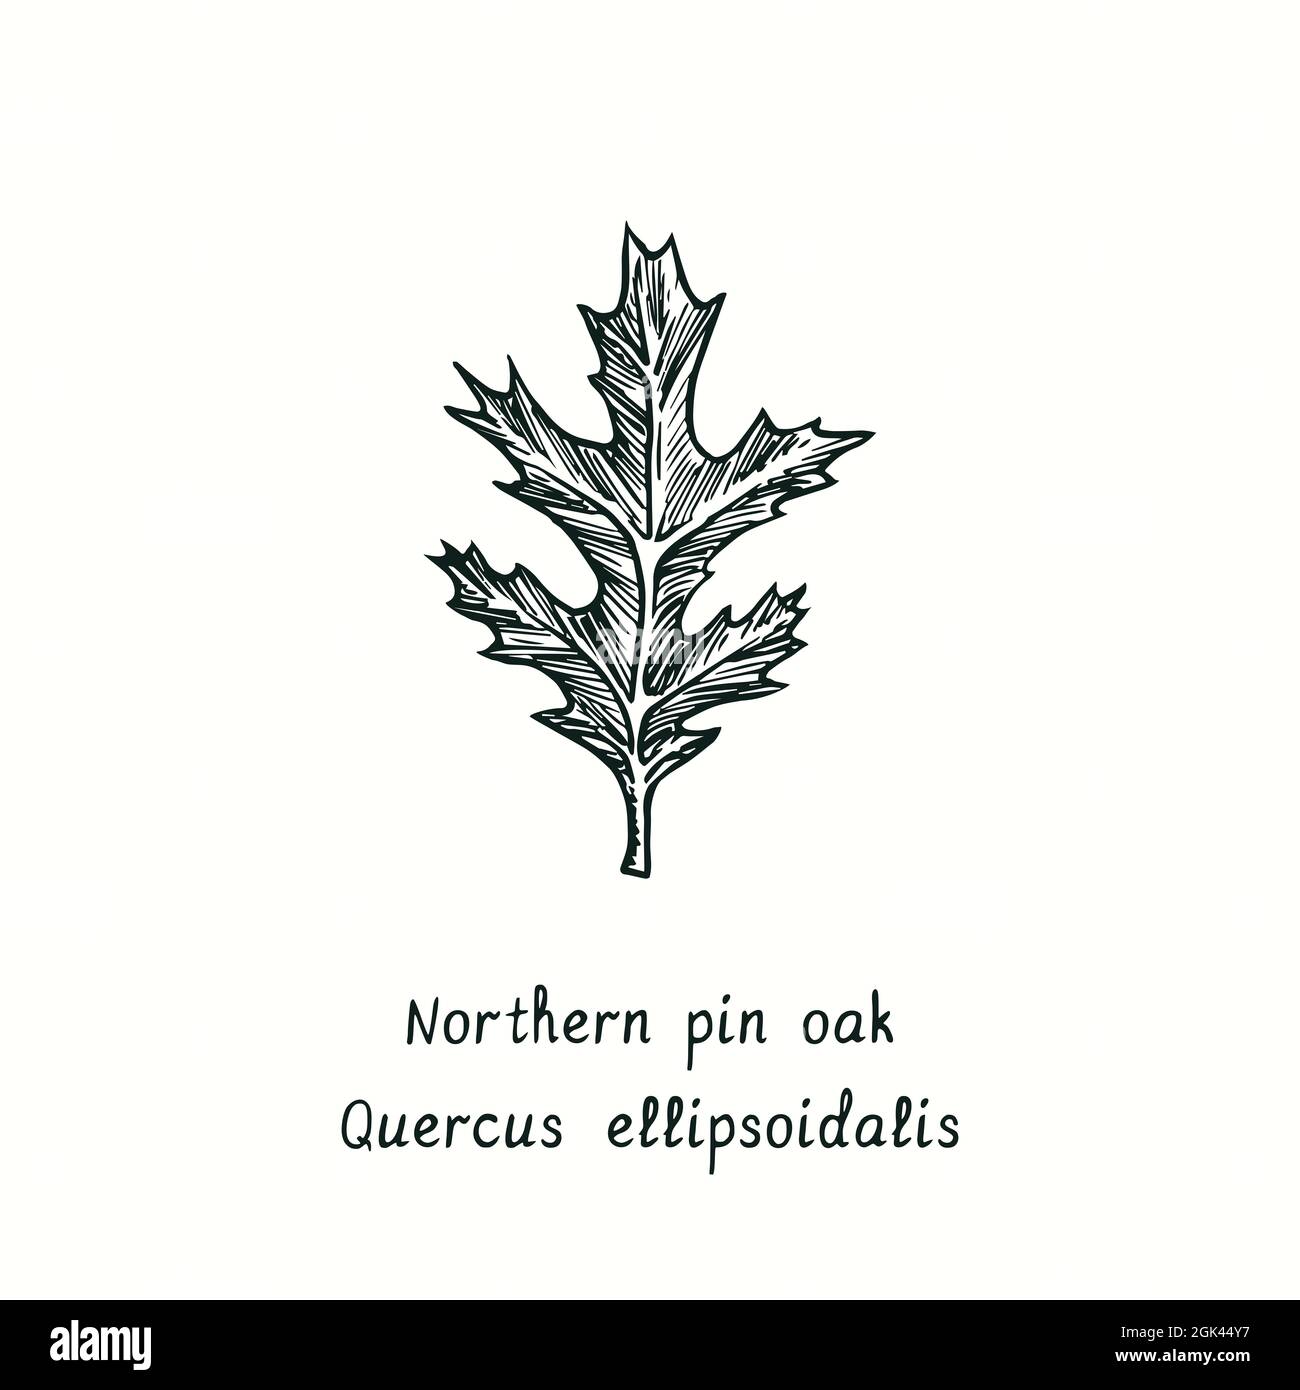 Northern pin oak (Quercus ellipsoidalis) leaf. Ink black and white doodle drawing in woodcut style. Stock Photo